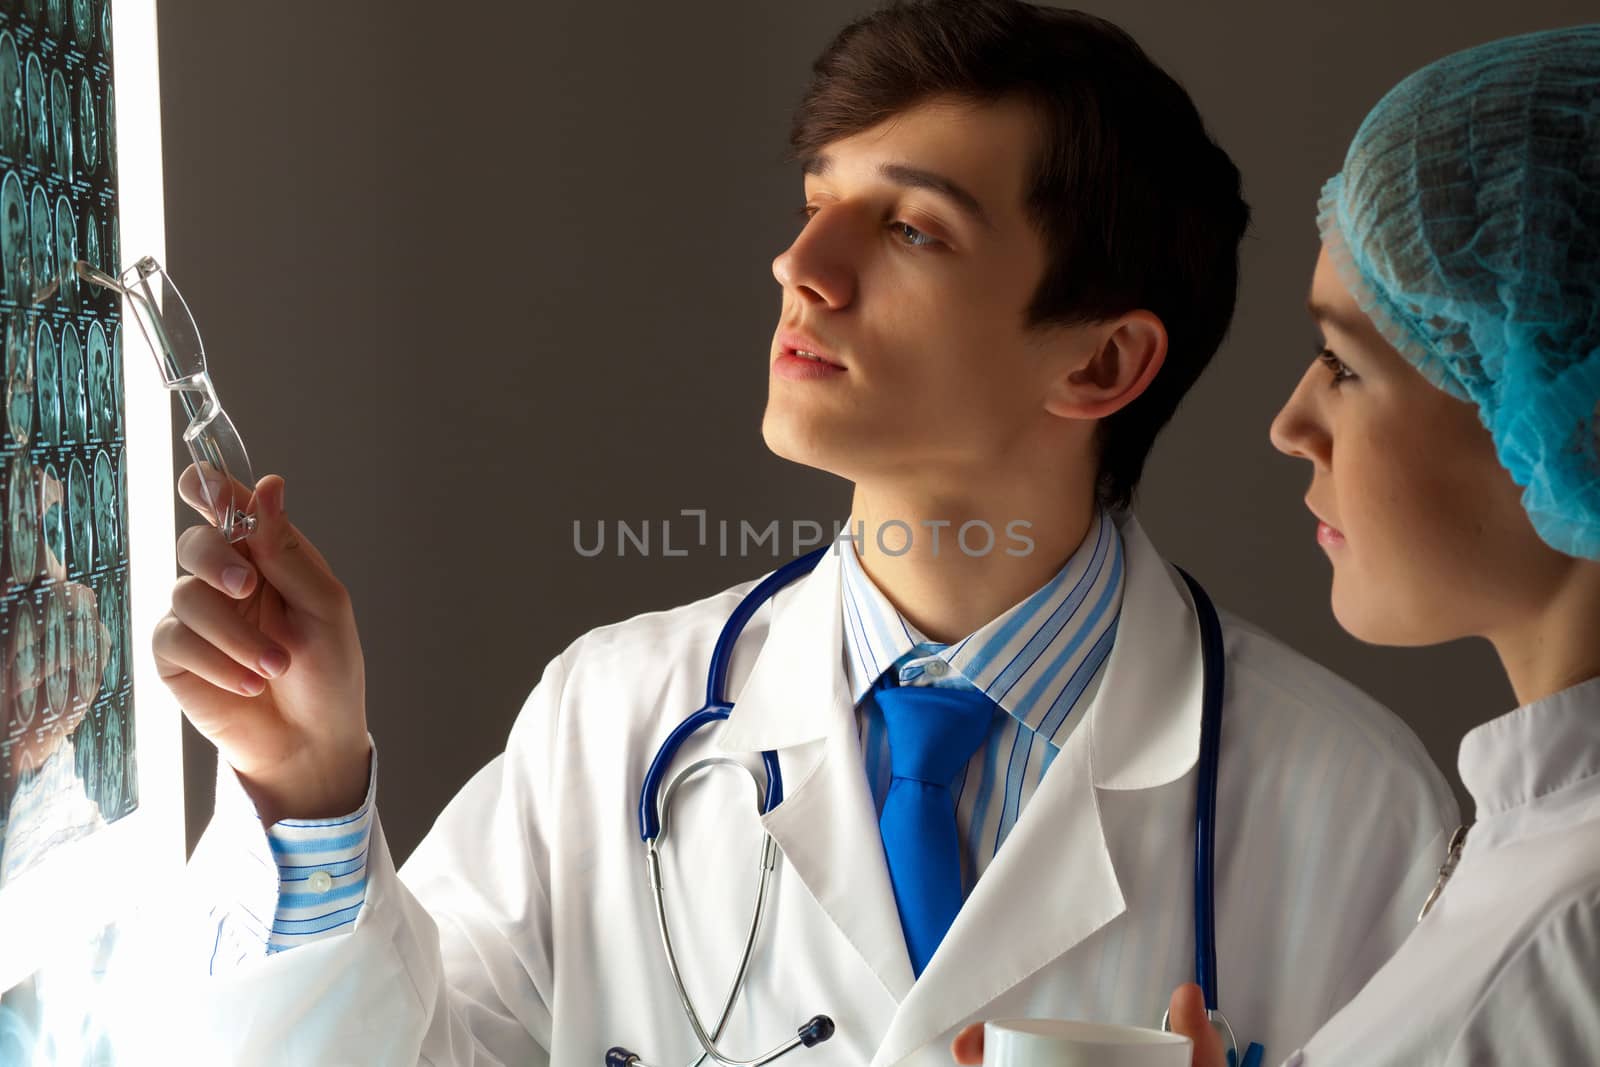 Image of two young two doctors discussing x-ray results